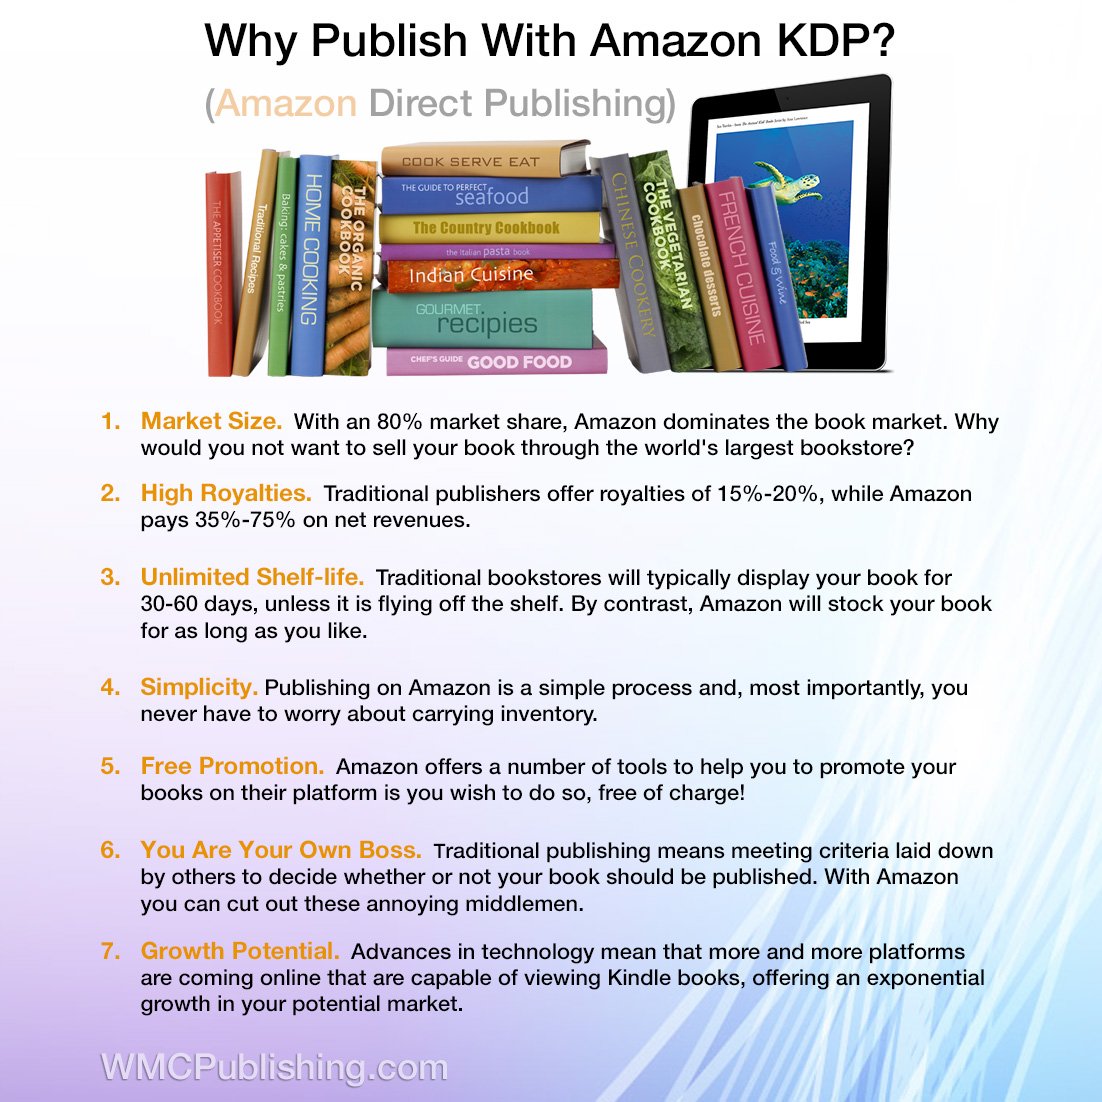 Why Publish with KDP